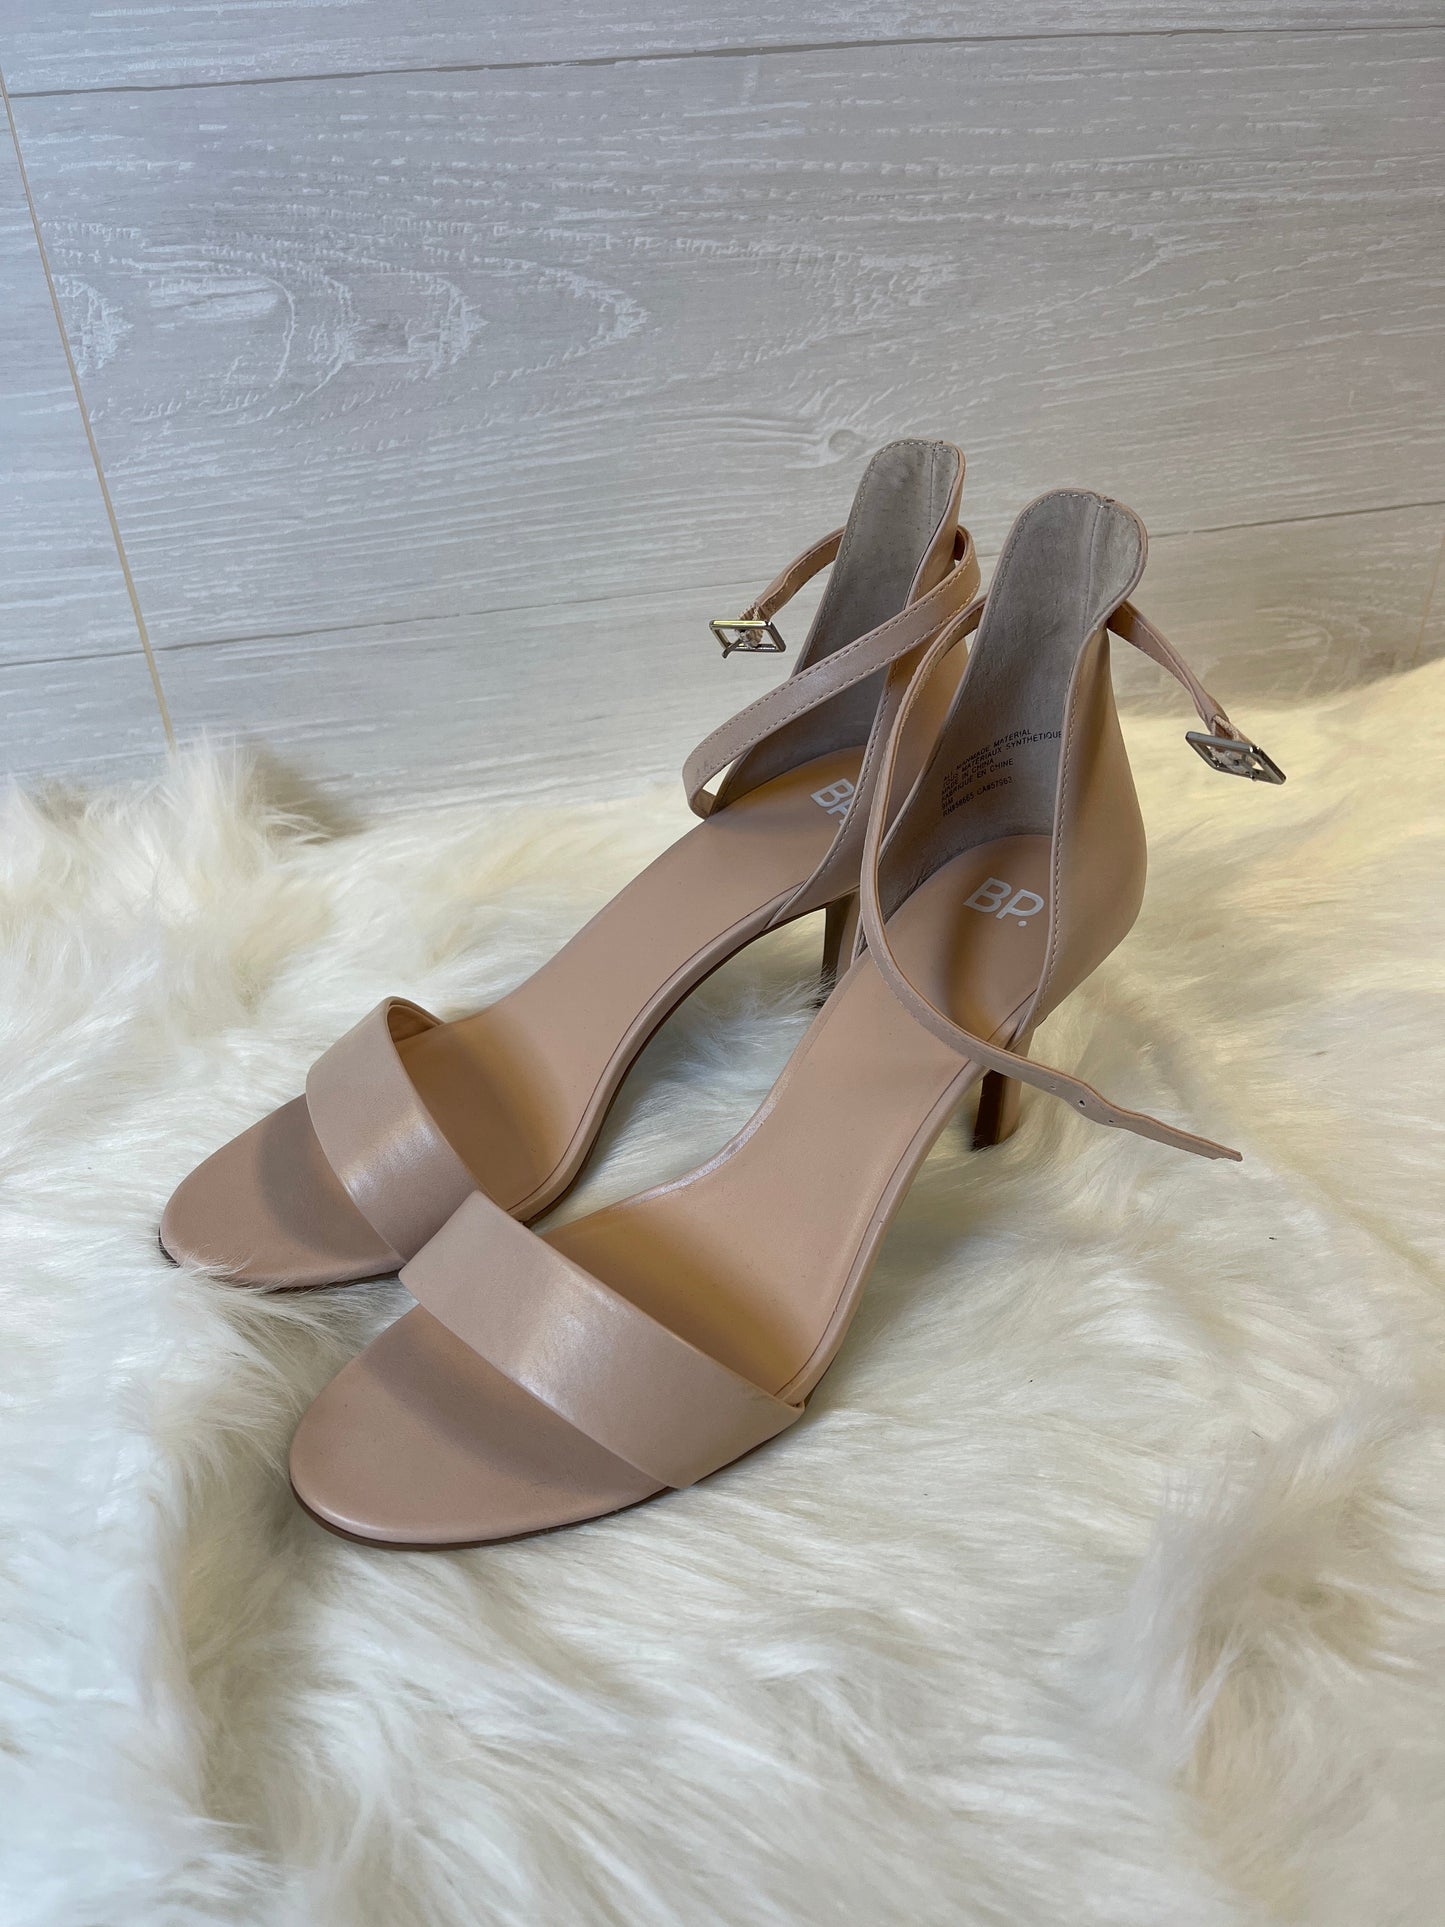 Shoes Heels Stiletto By Bp  Size: 9.5